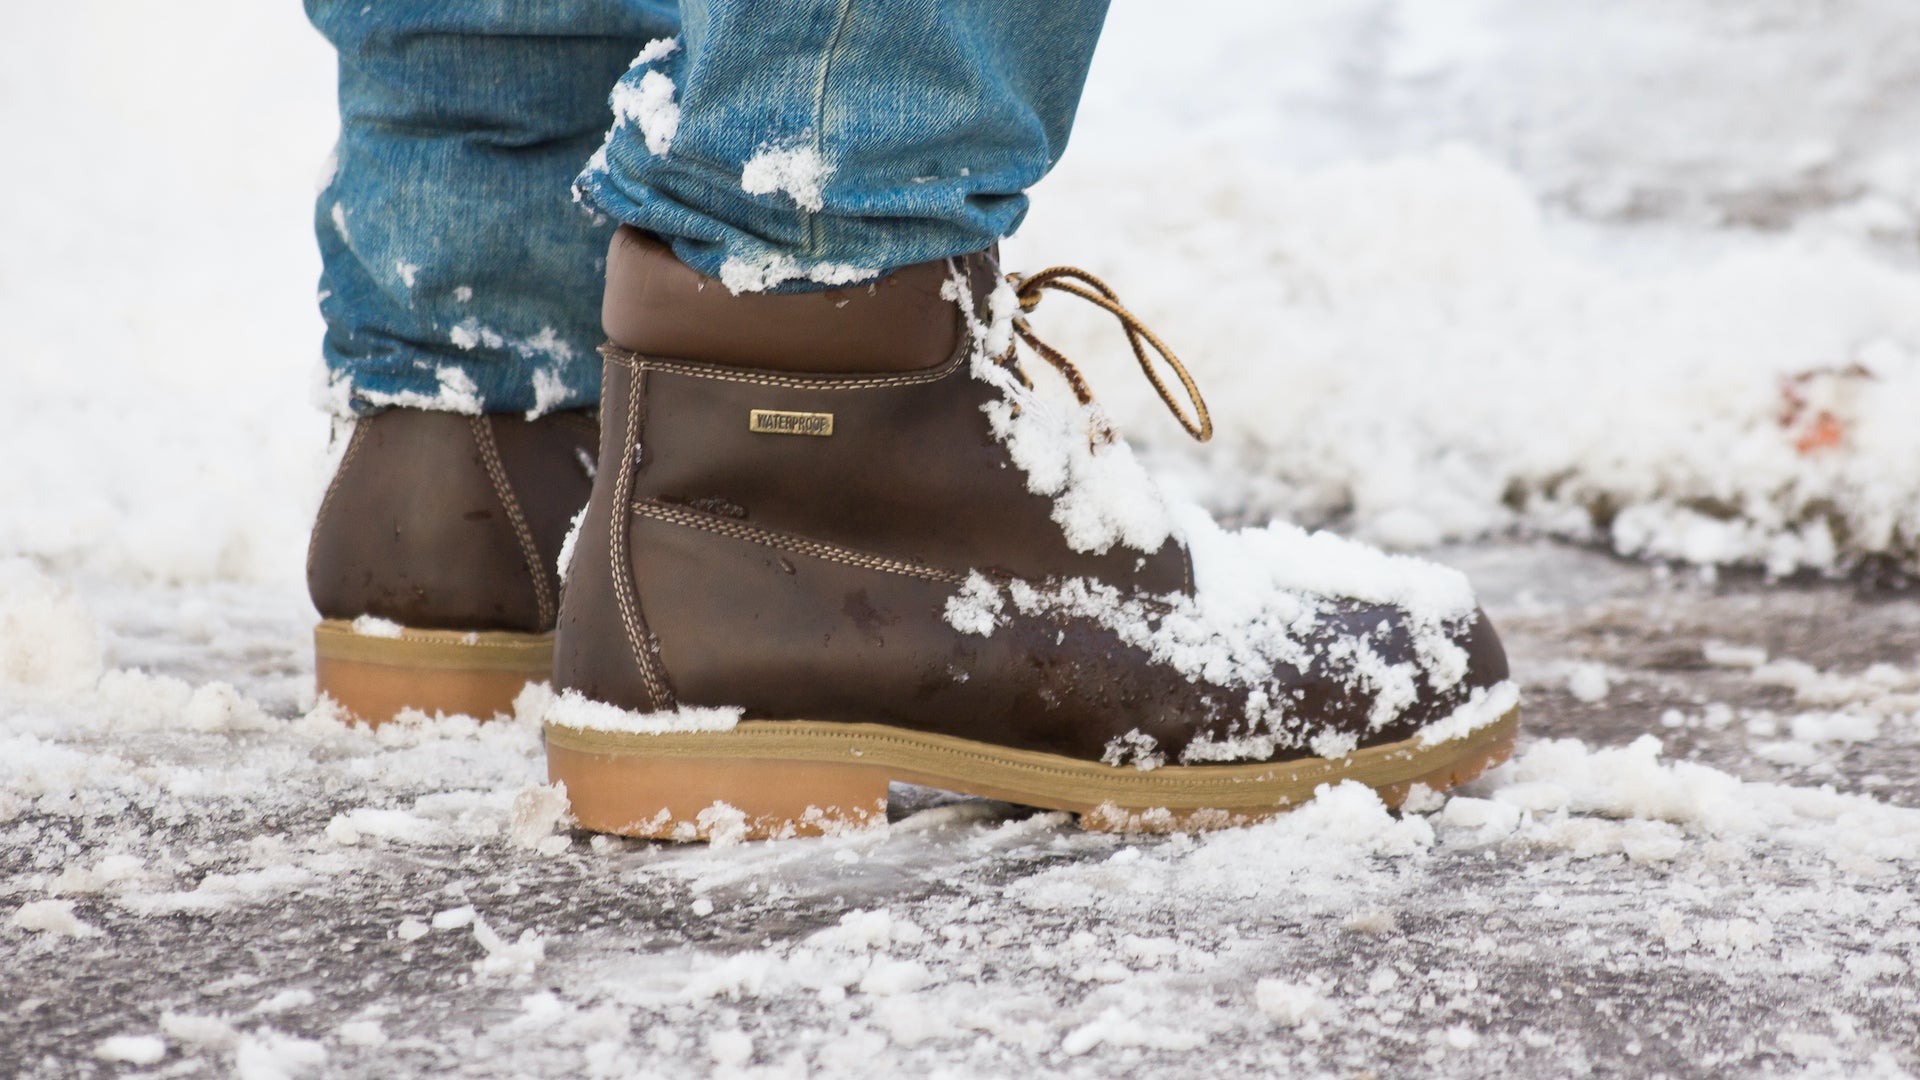 Best Snow Boots for Men (2022): Winter Boots Reviews & Buying Guide